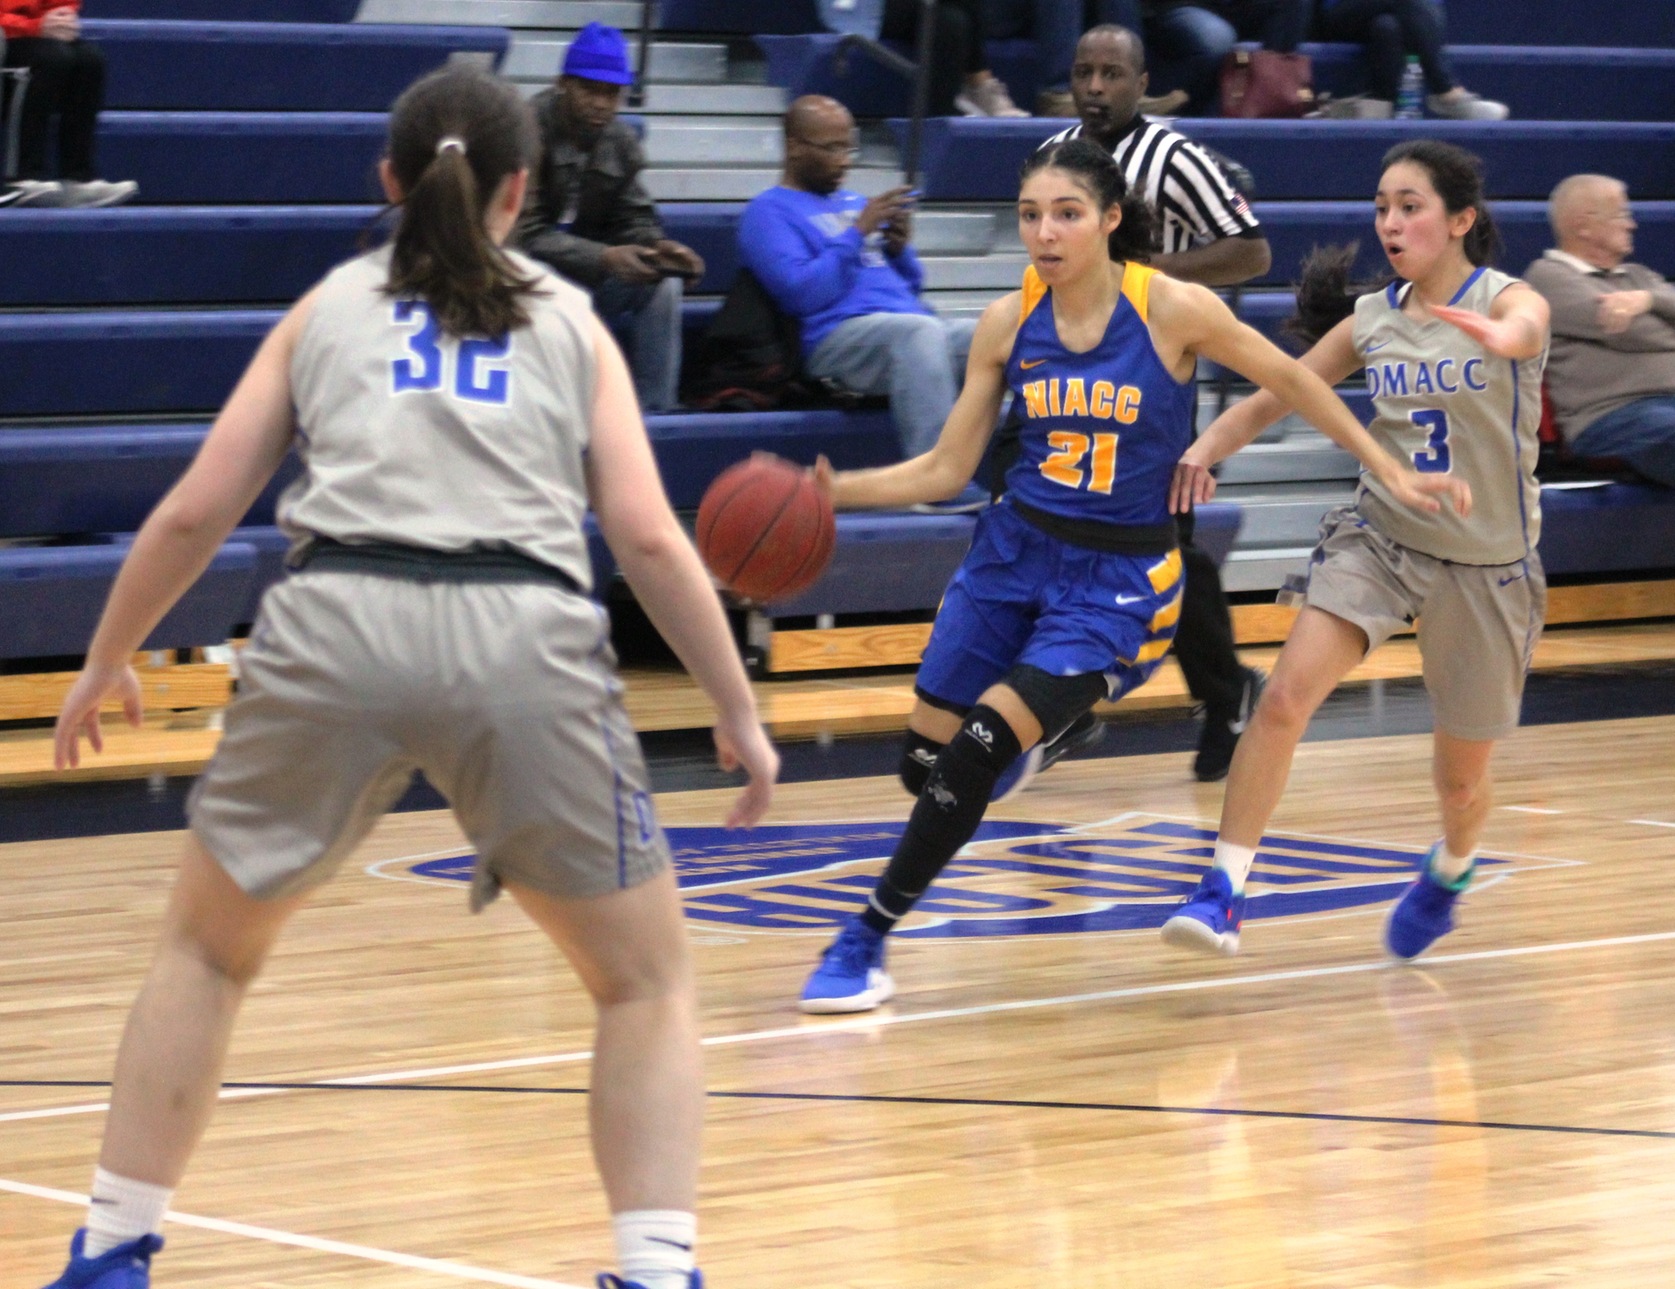 Jada Buford scored 39 points in the No. 5 Lady Trojans' win over DMACC on Wednesday.